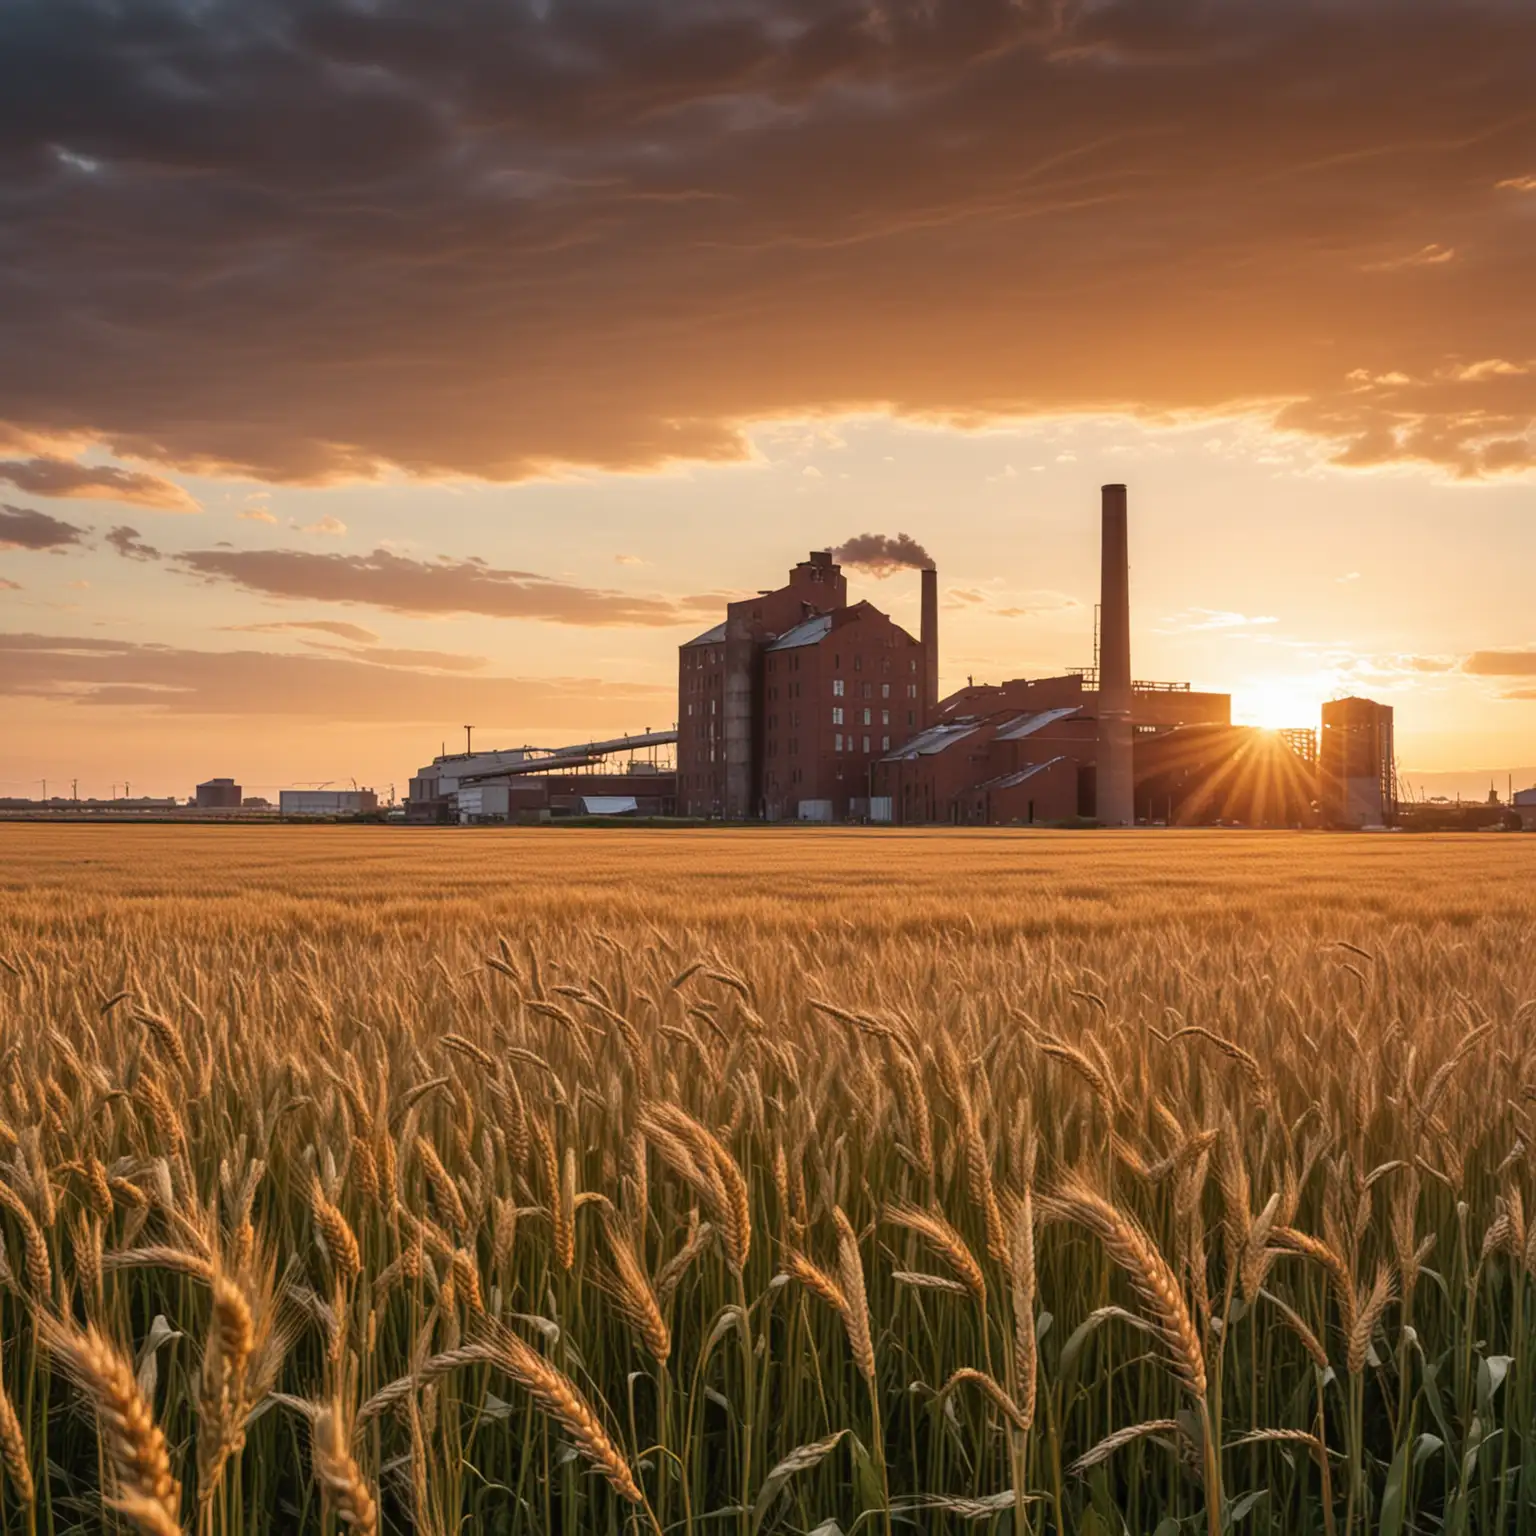 Sunset Over Windy Wheat Field with Old Factory